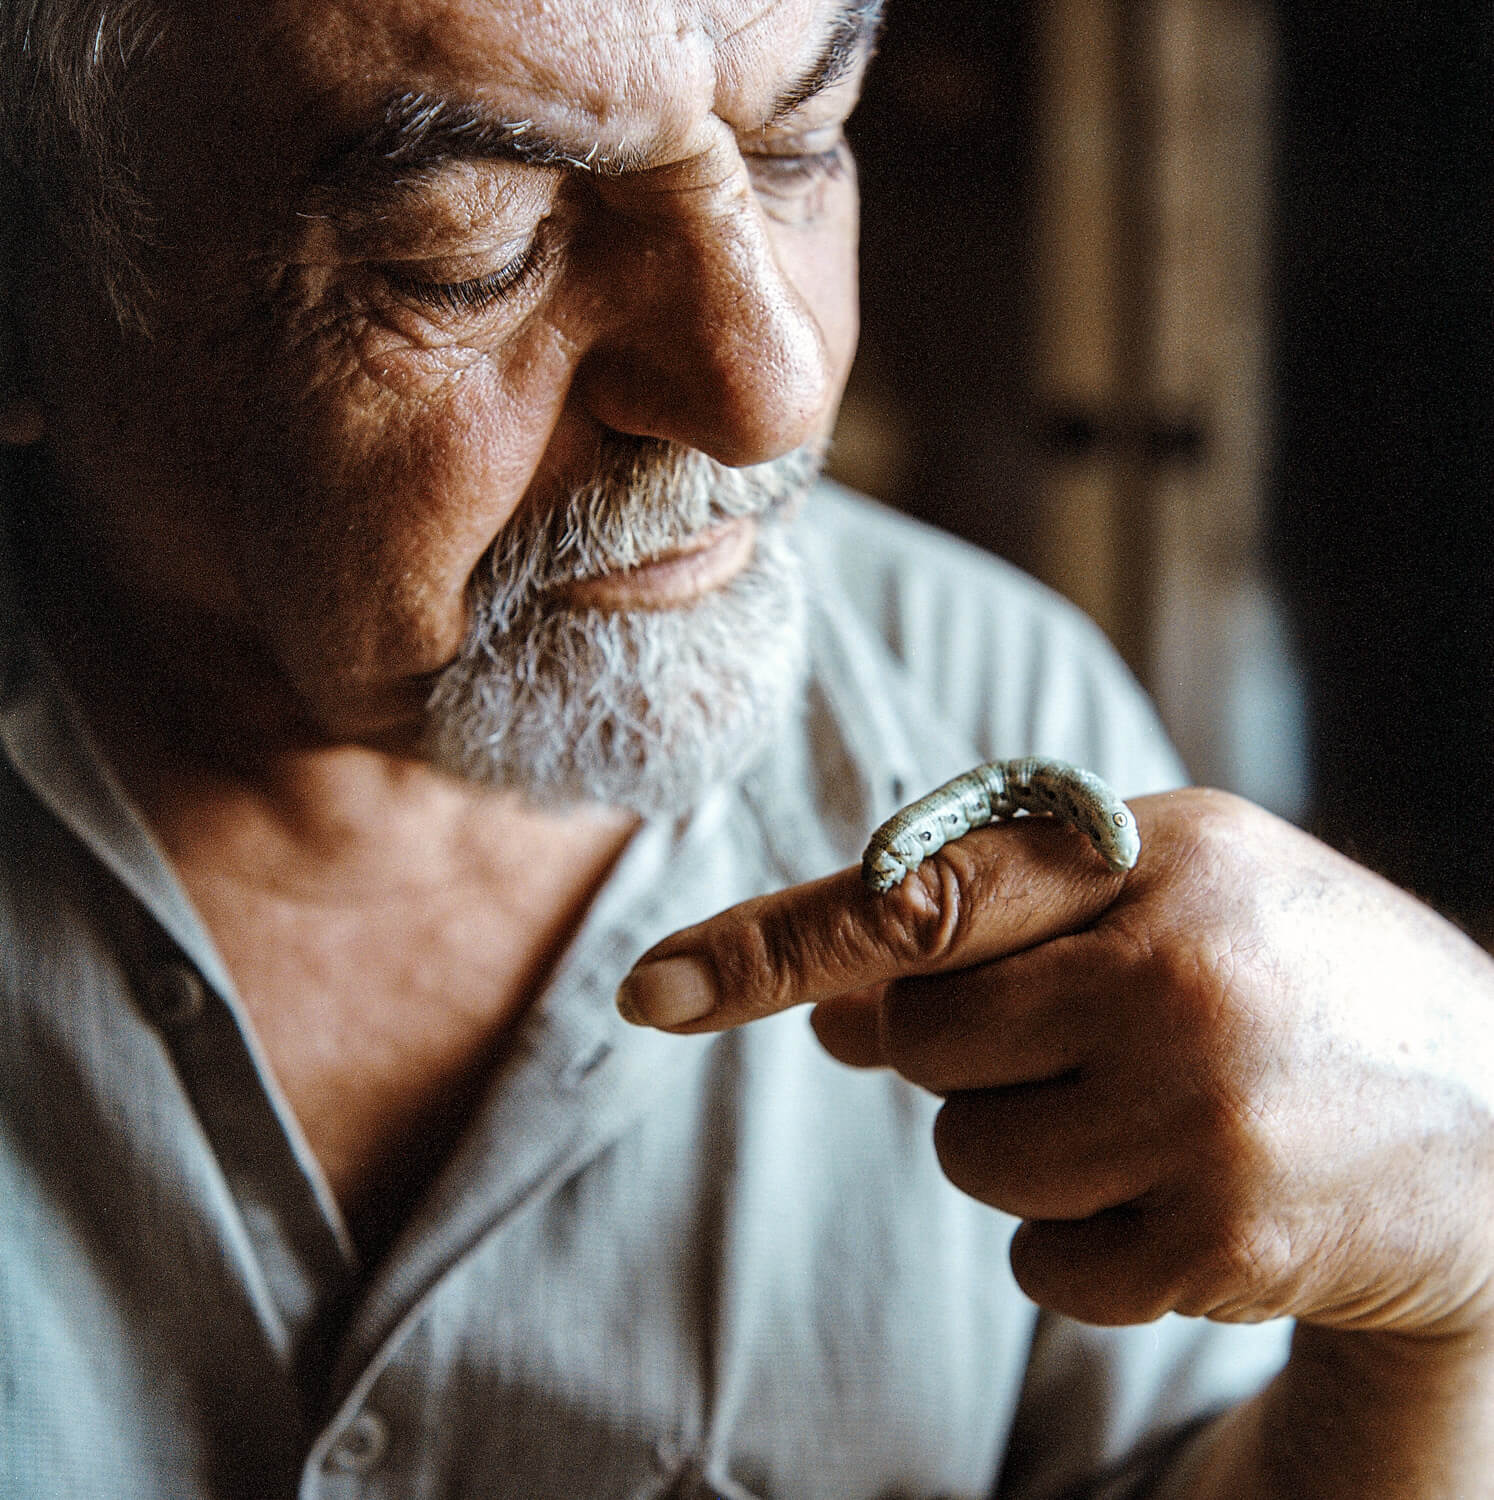 An elderly man closely examines a caterpillar on his finger, symbolizing curiosity and a connection to the natural world.